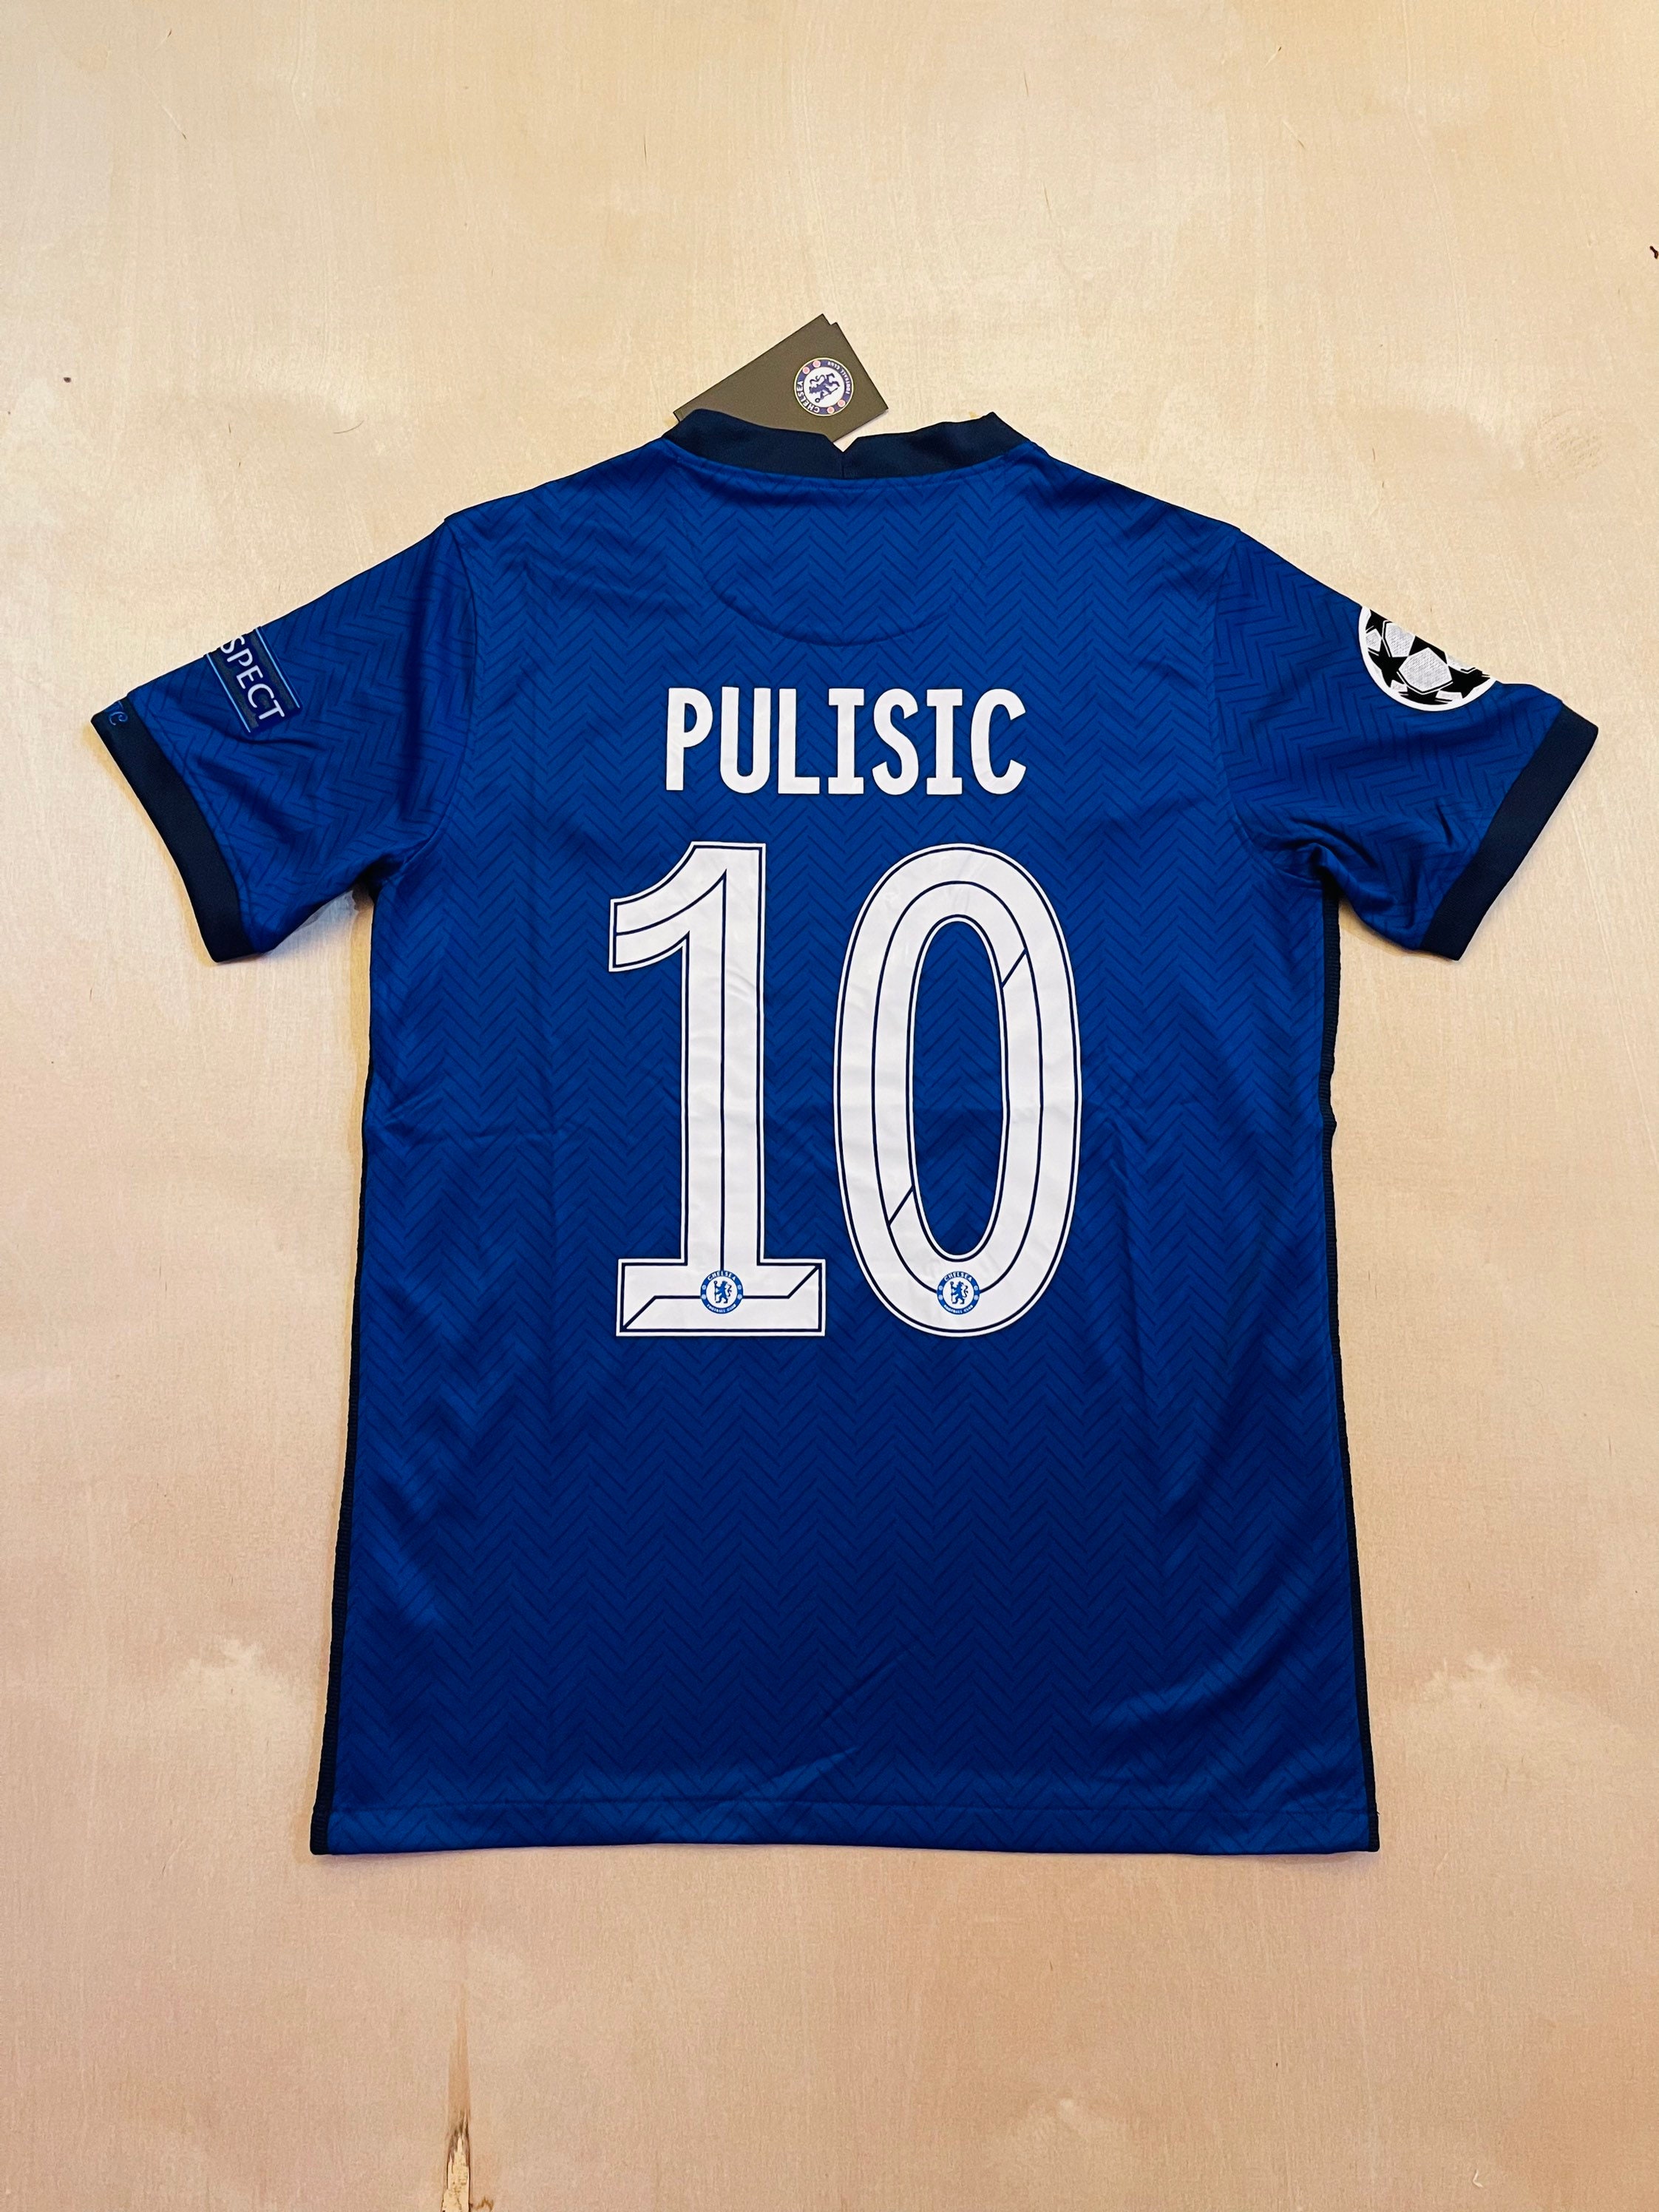 Pulisic 10 Chelsea Home soccer jersey Champions league final | Etsy